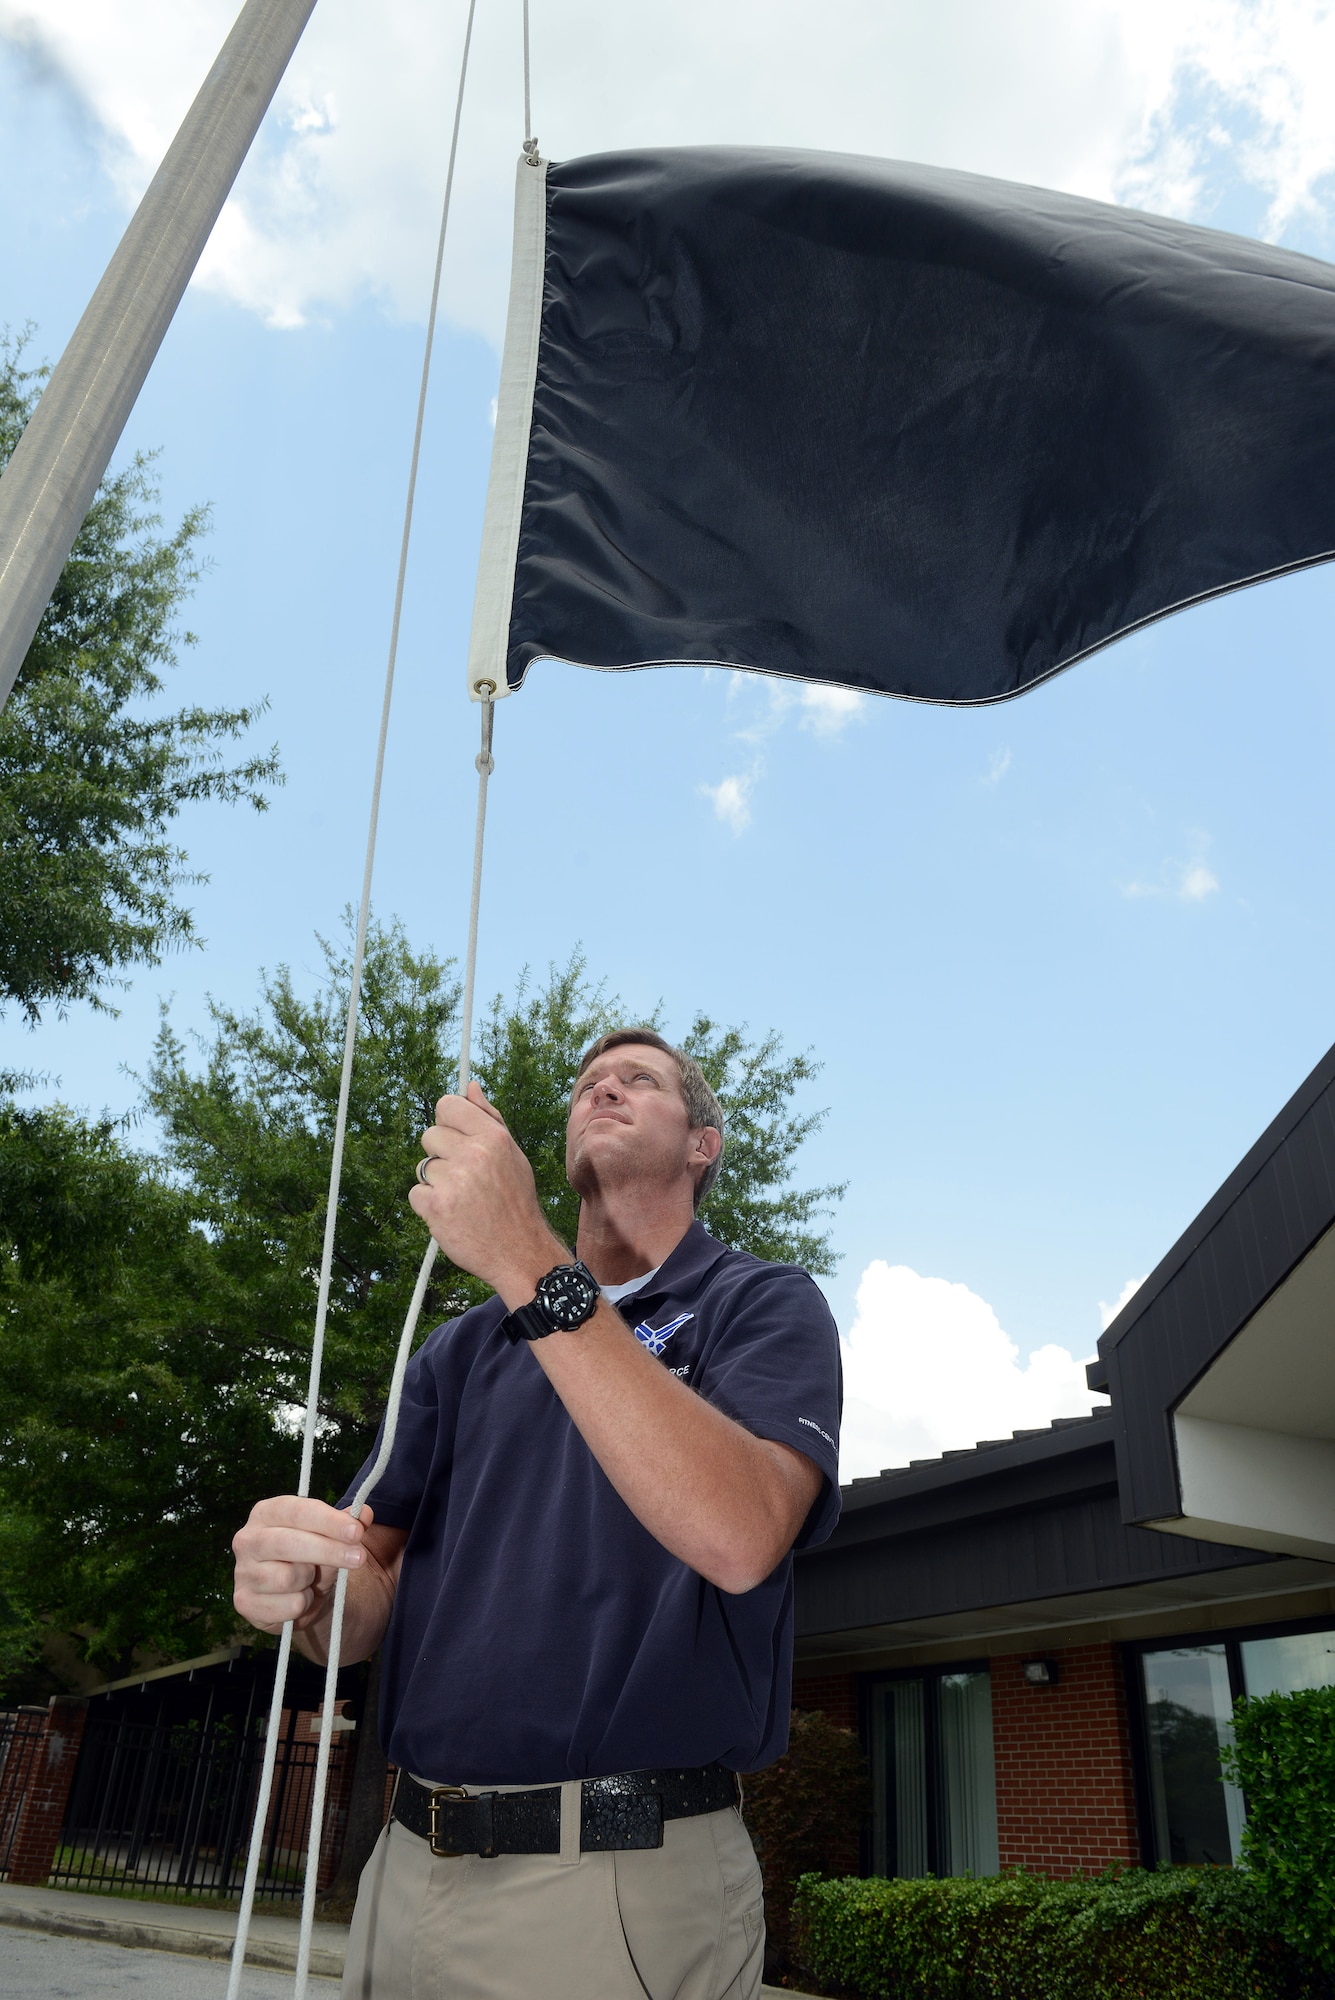 Patrick Stone, 78th Air Base Wing recreation assistant, raises the black flag indicating outdoor heat conditions at Robins. White, green, yellow, red and black flags are used to alert those outside of the current heat index. (U.S. Air Force photo by Tommie Horton) 